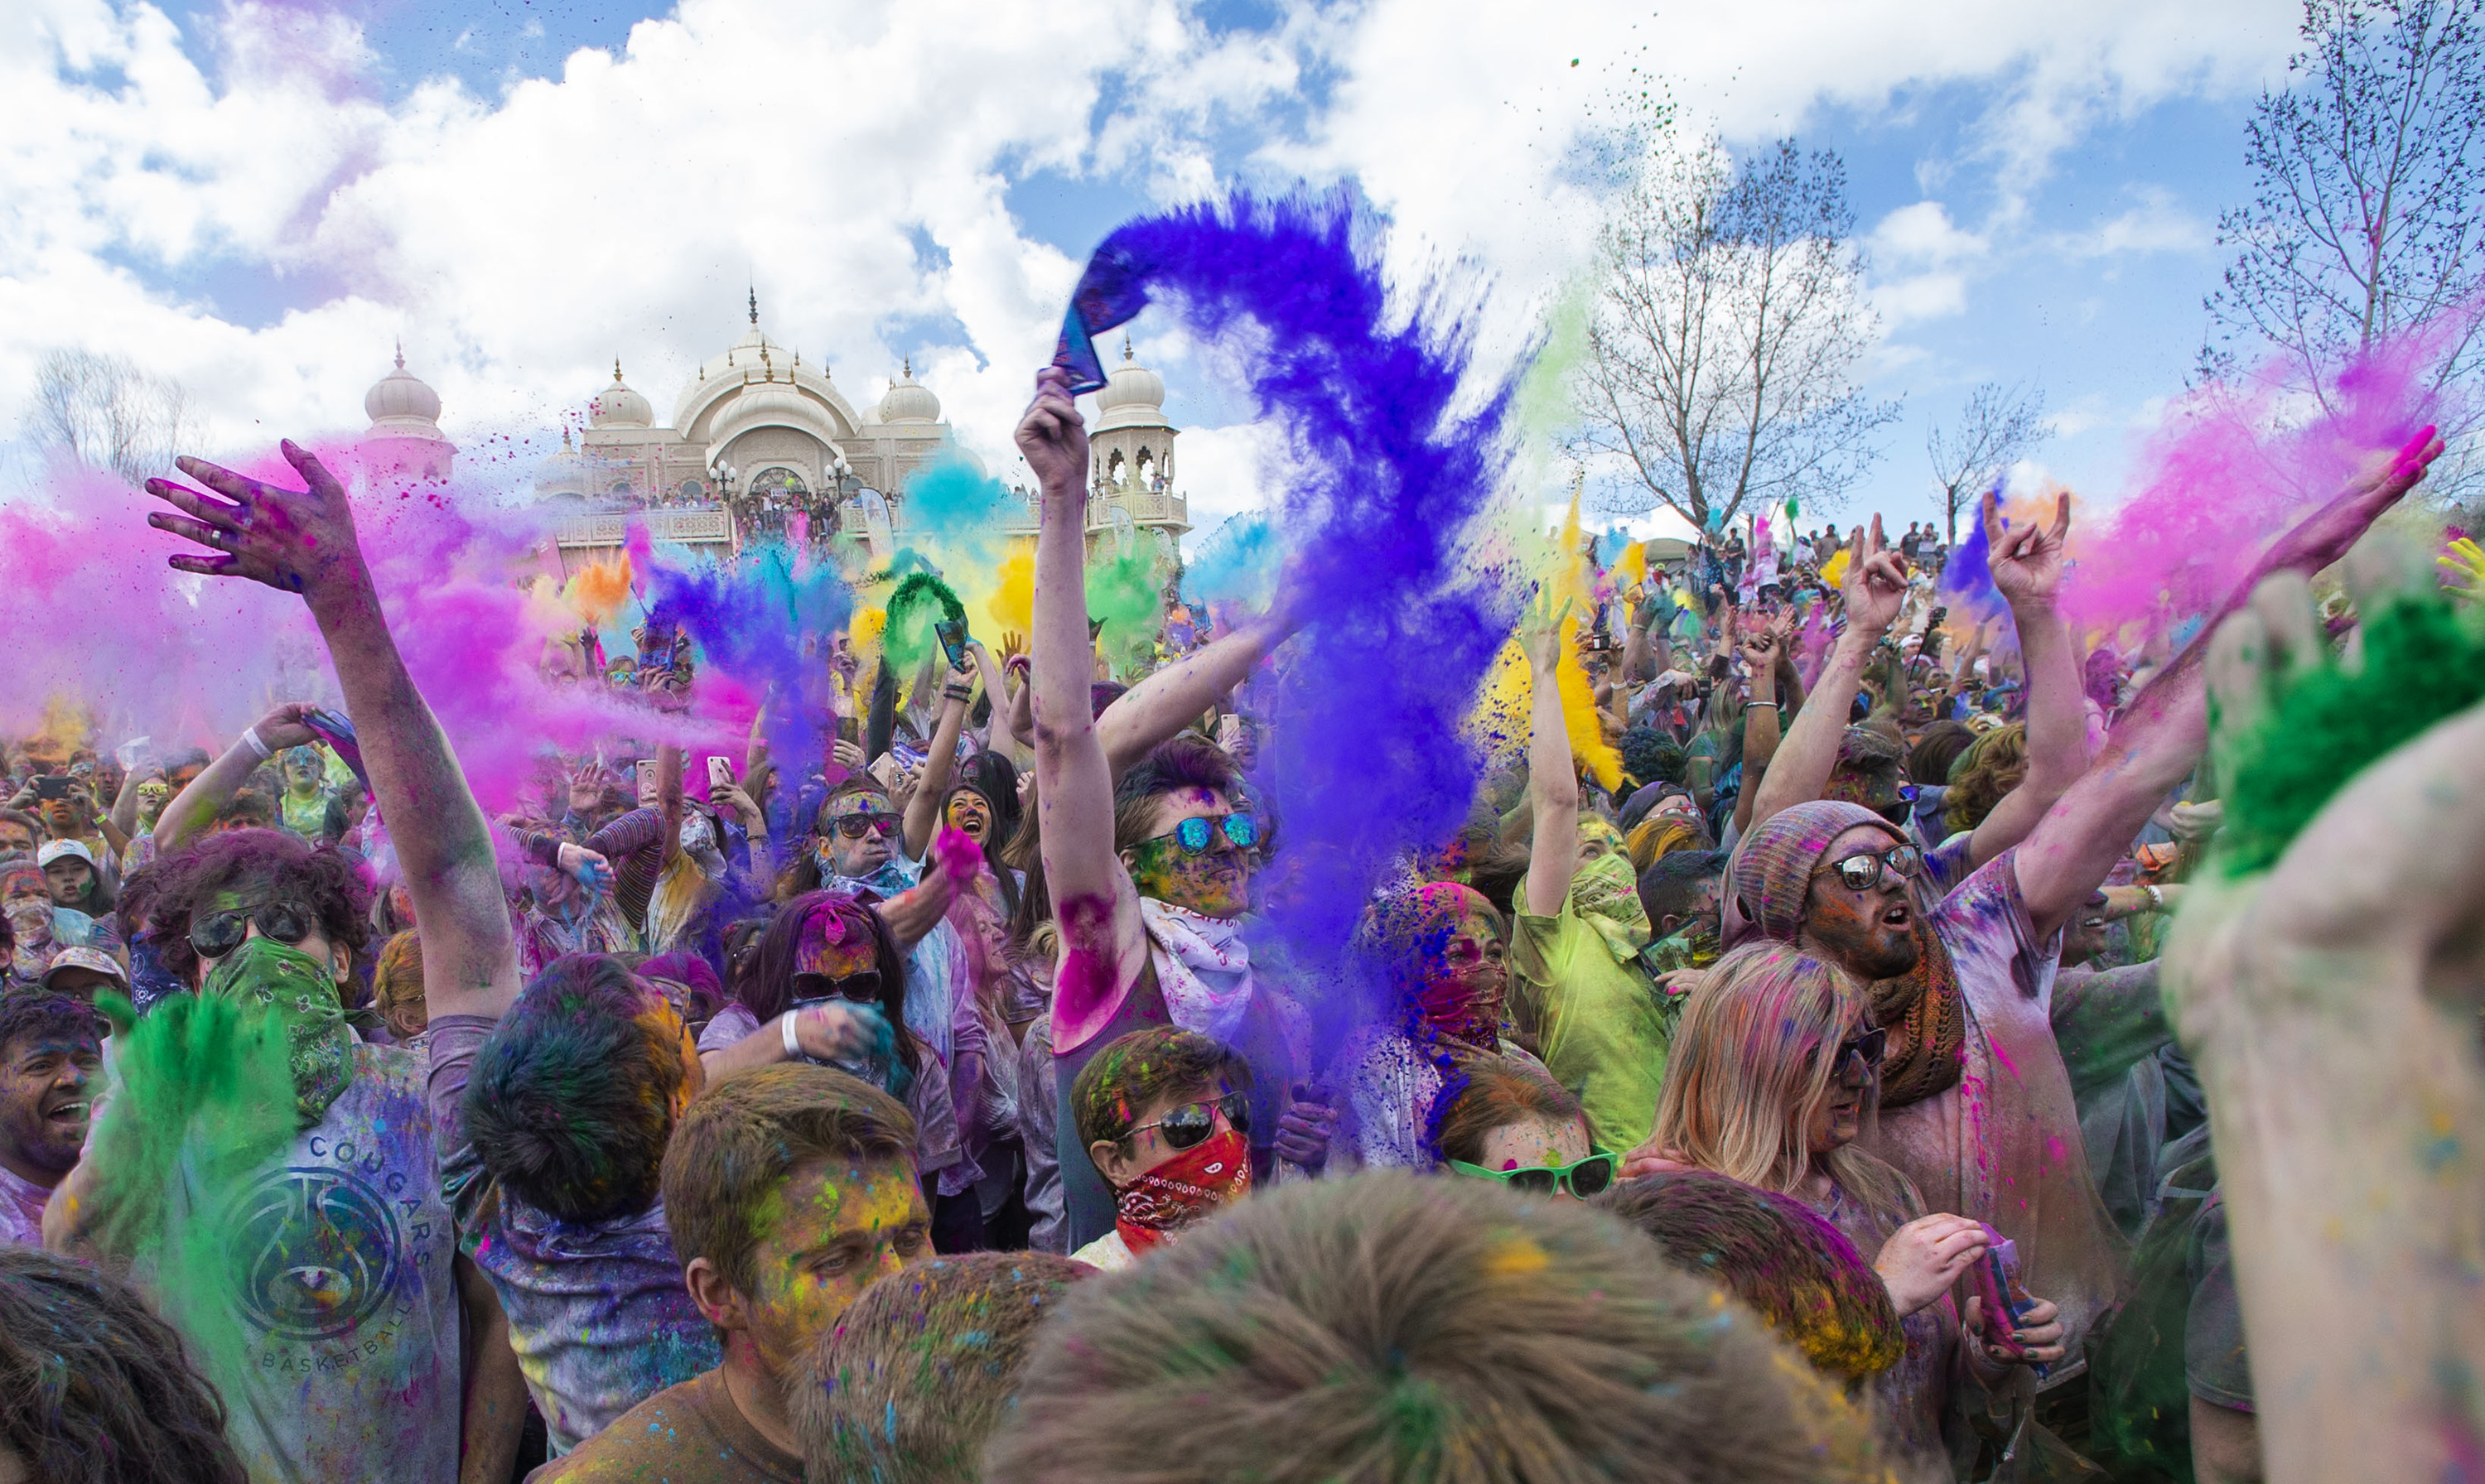 Palak Jayswal: Holi is about more than throwing colors